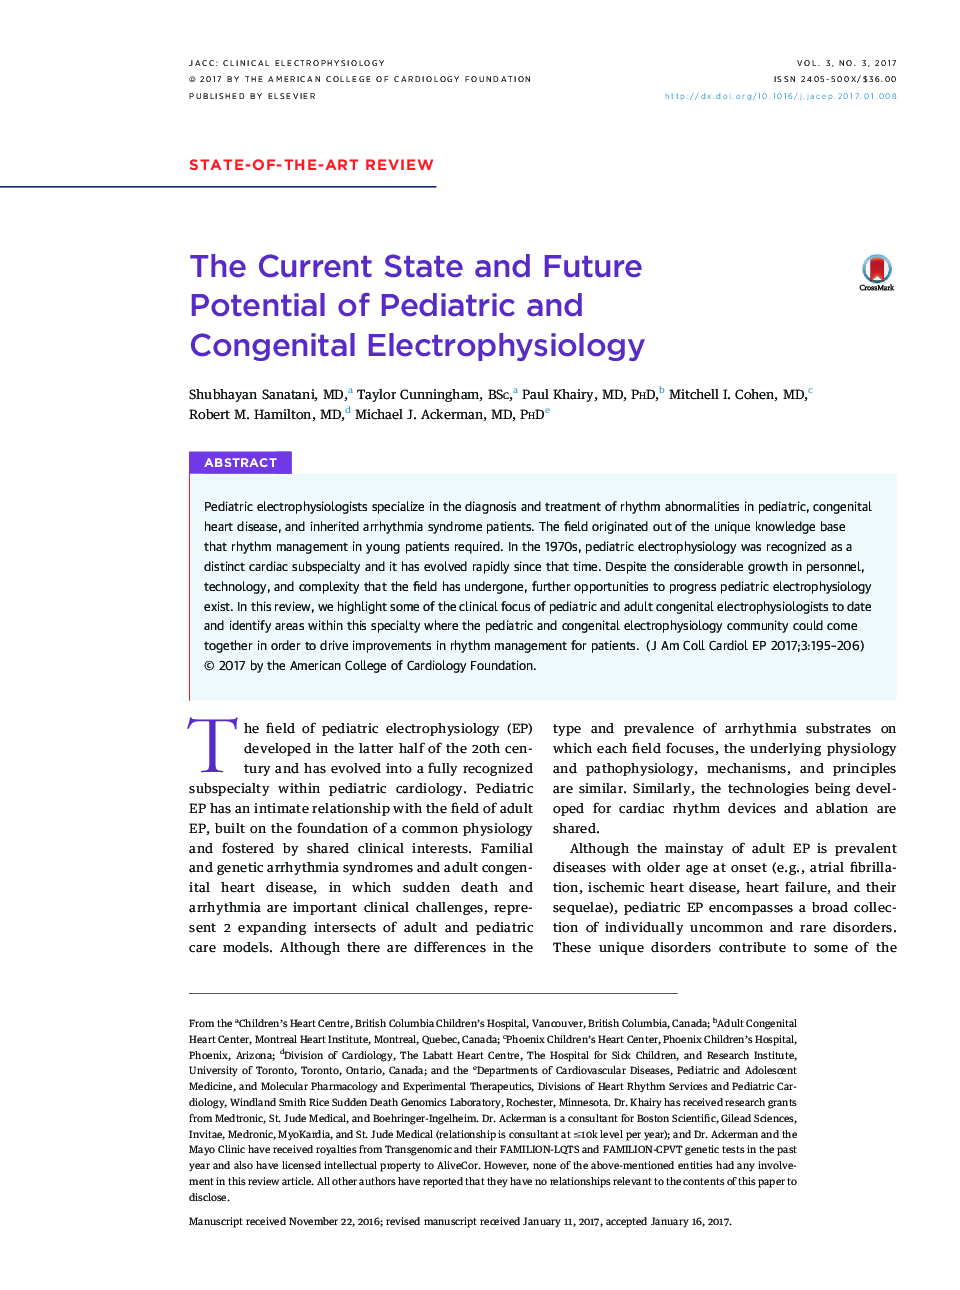 The Current State and Future PotentialÂ ofÂ Pediatric and CongenitalÂ Electrophysiology